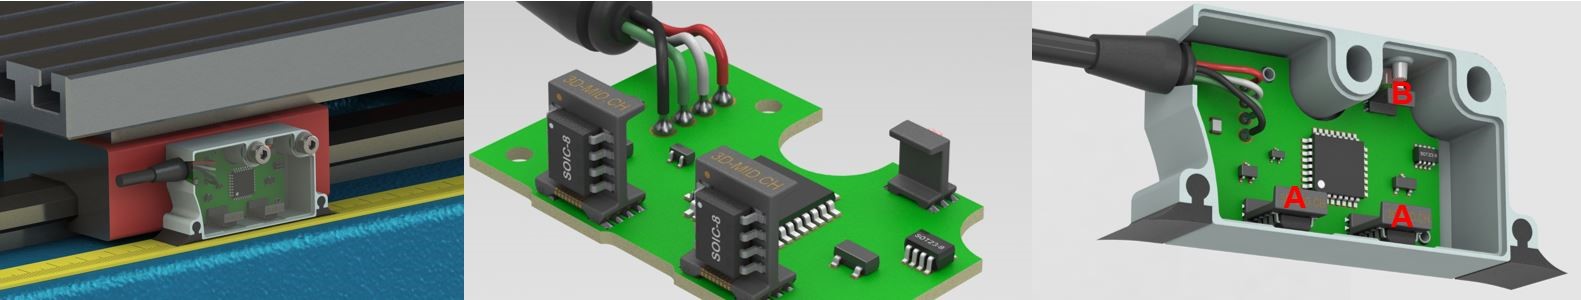 Component carriers replace flexible printed circuit boards in linear measuring systems